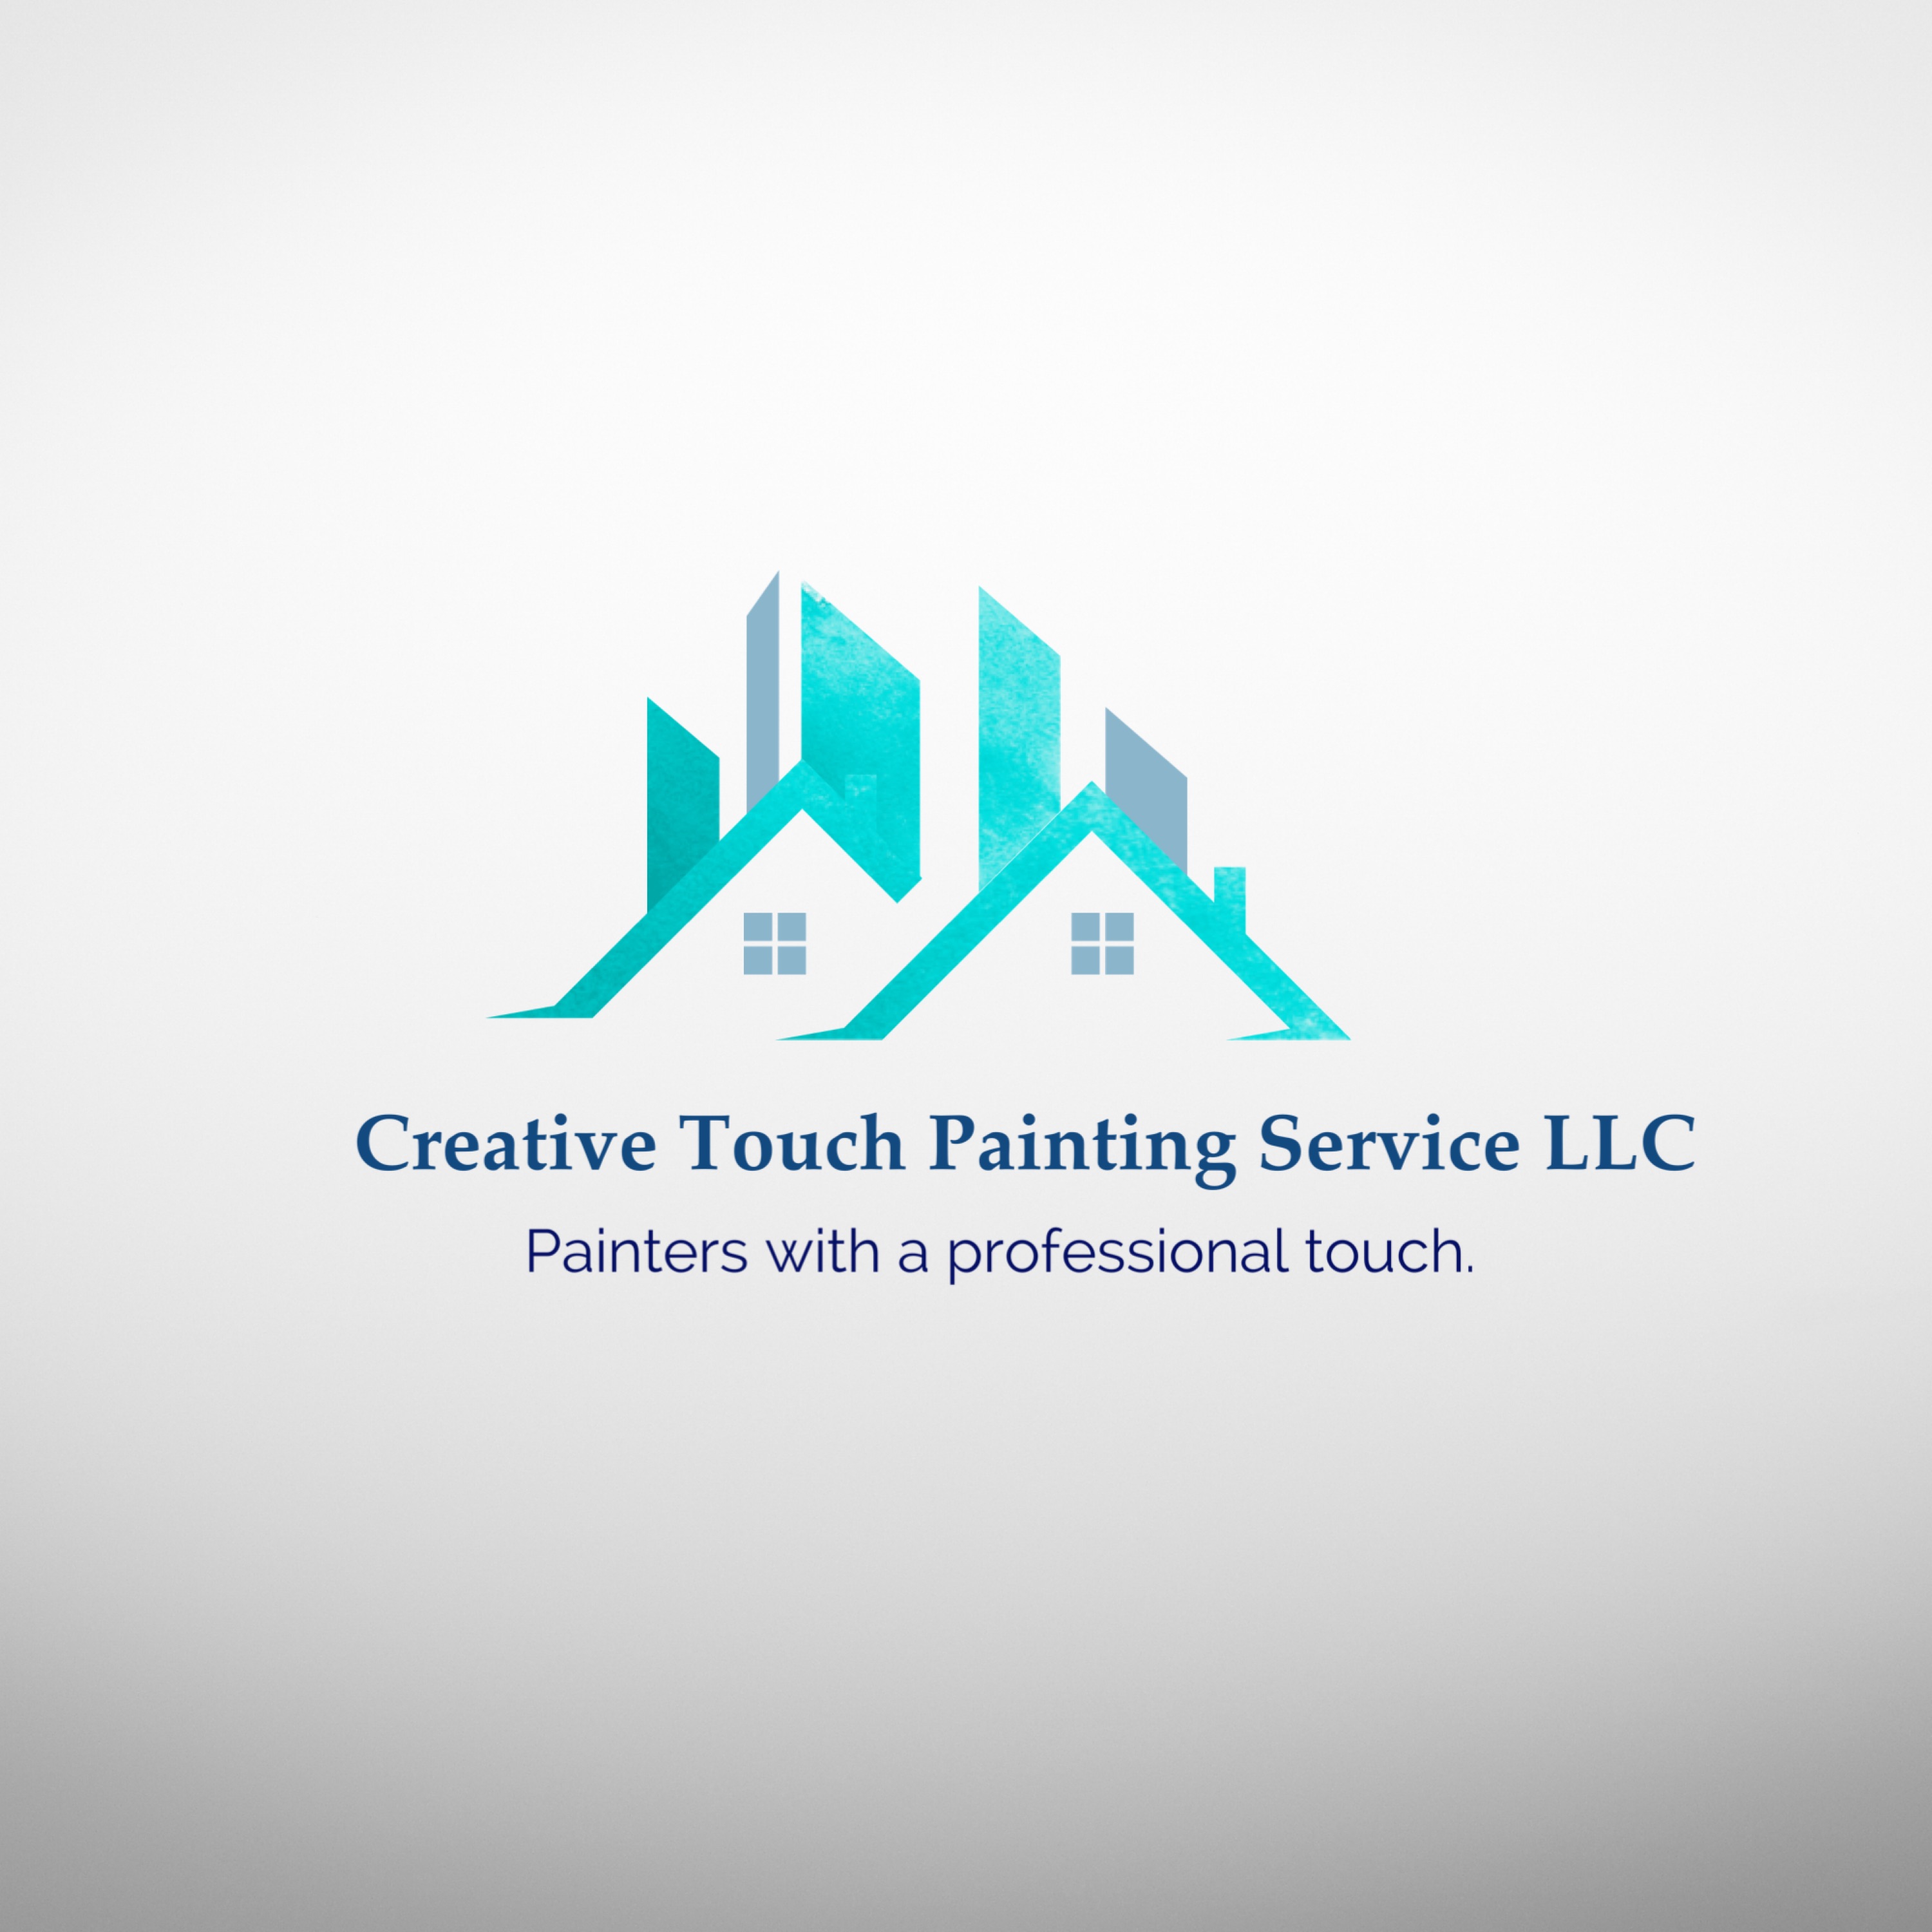 Creative Touch Painting Service LLC Logo